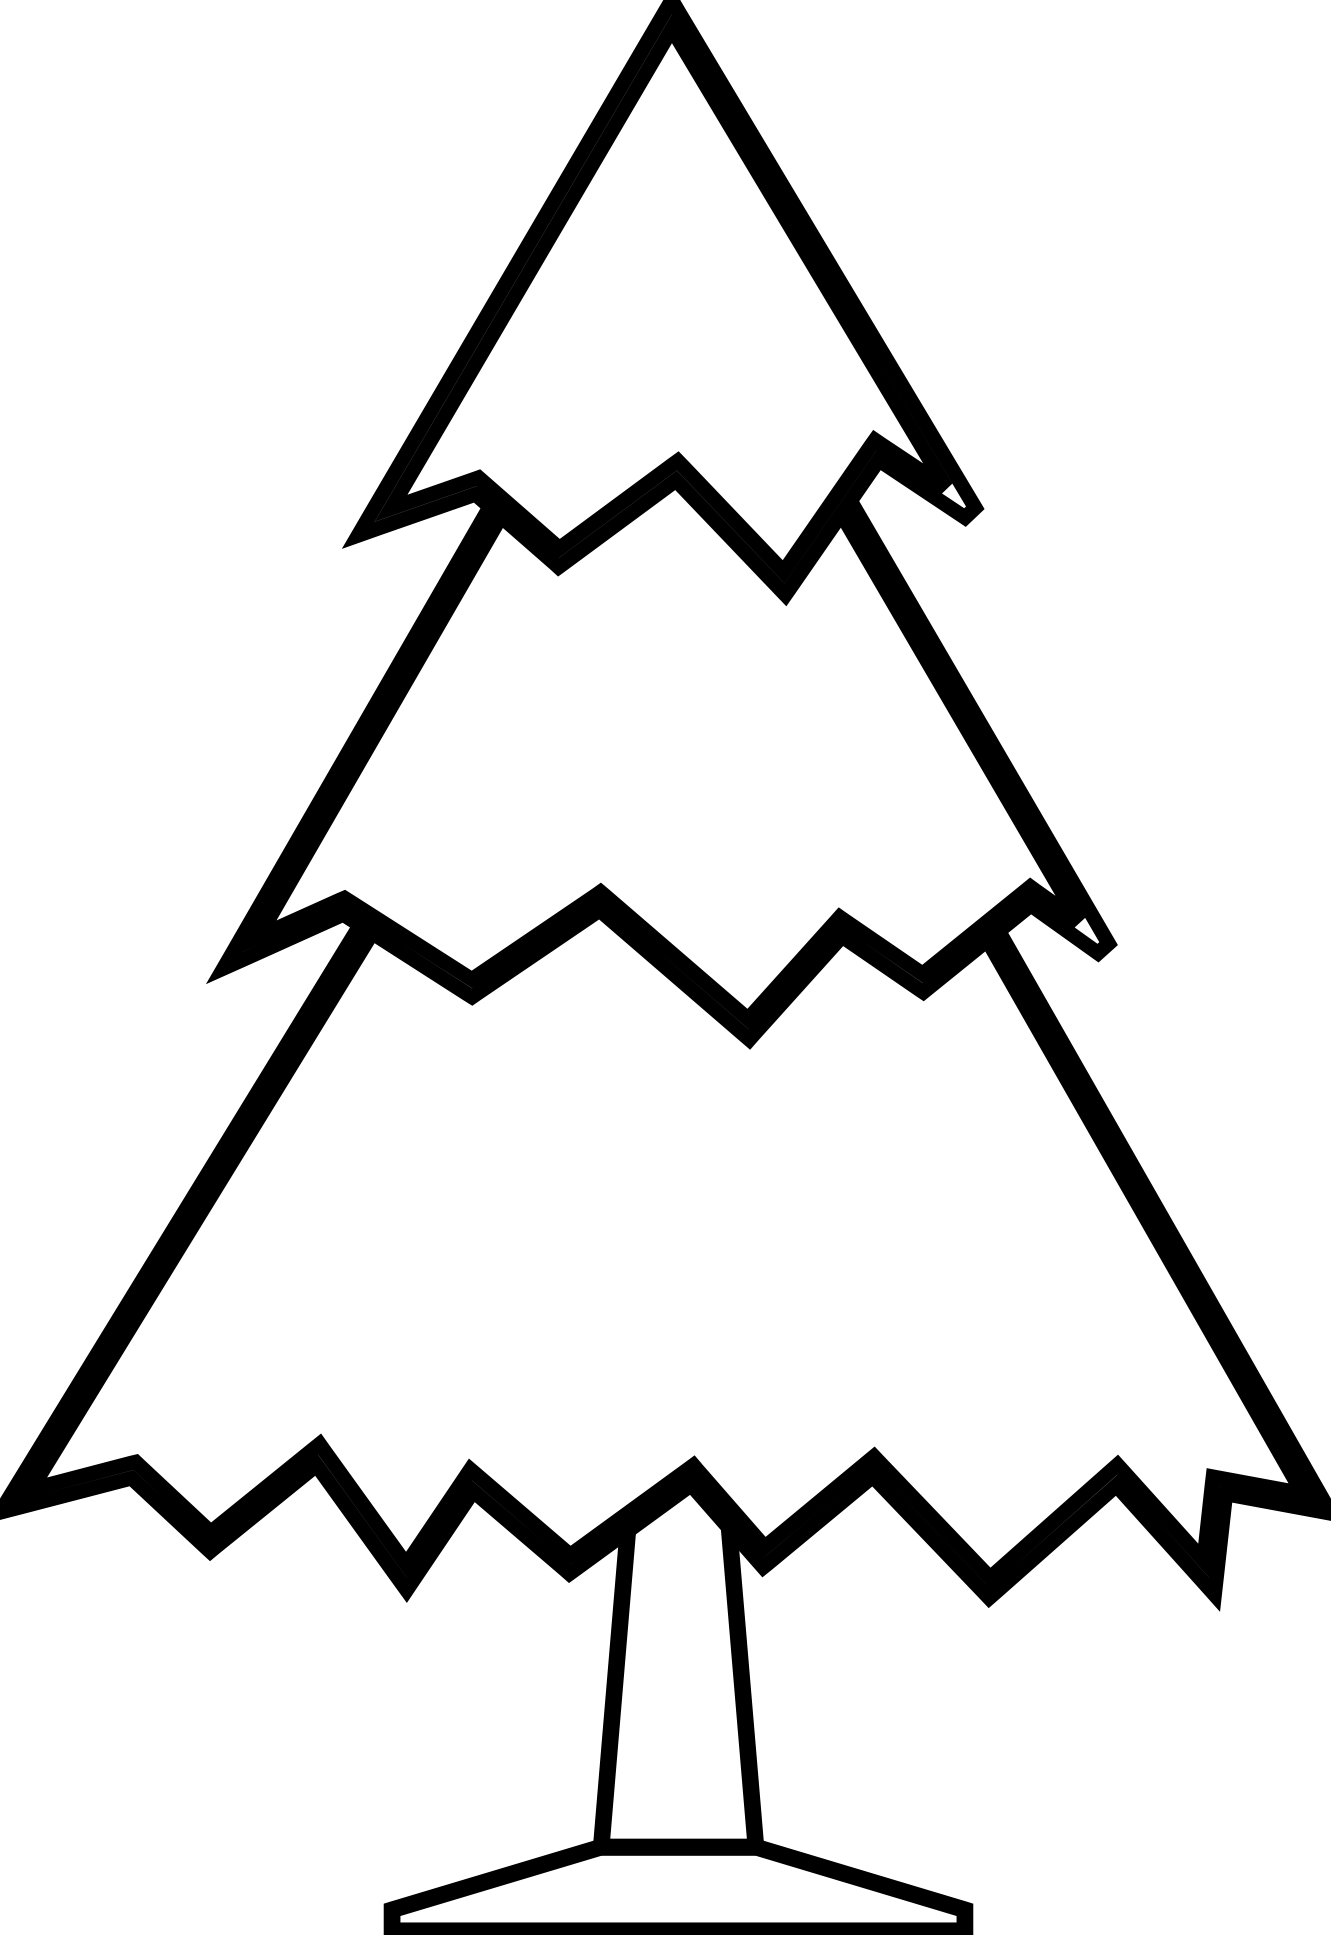 Palm tree christmas clipart black and white